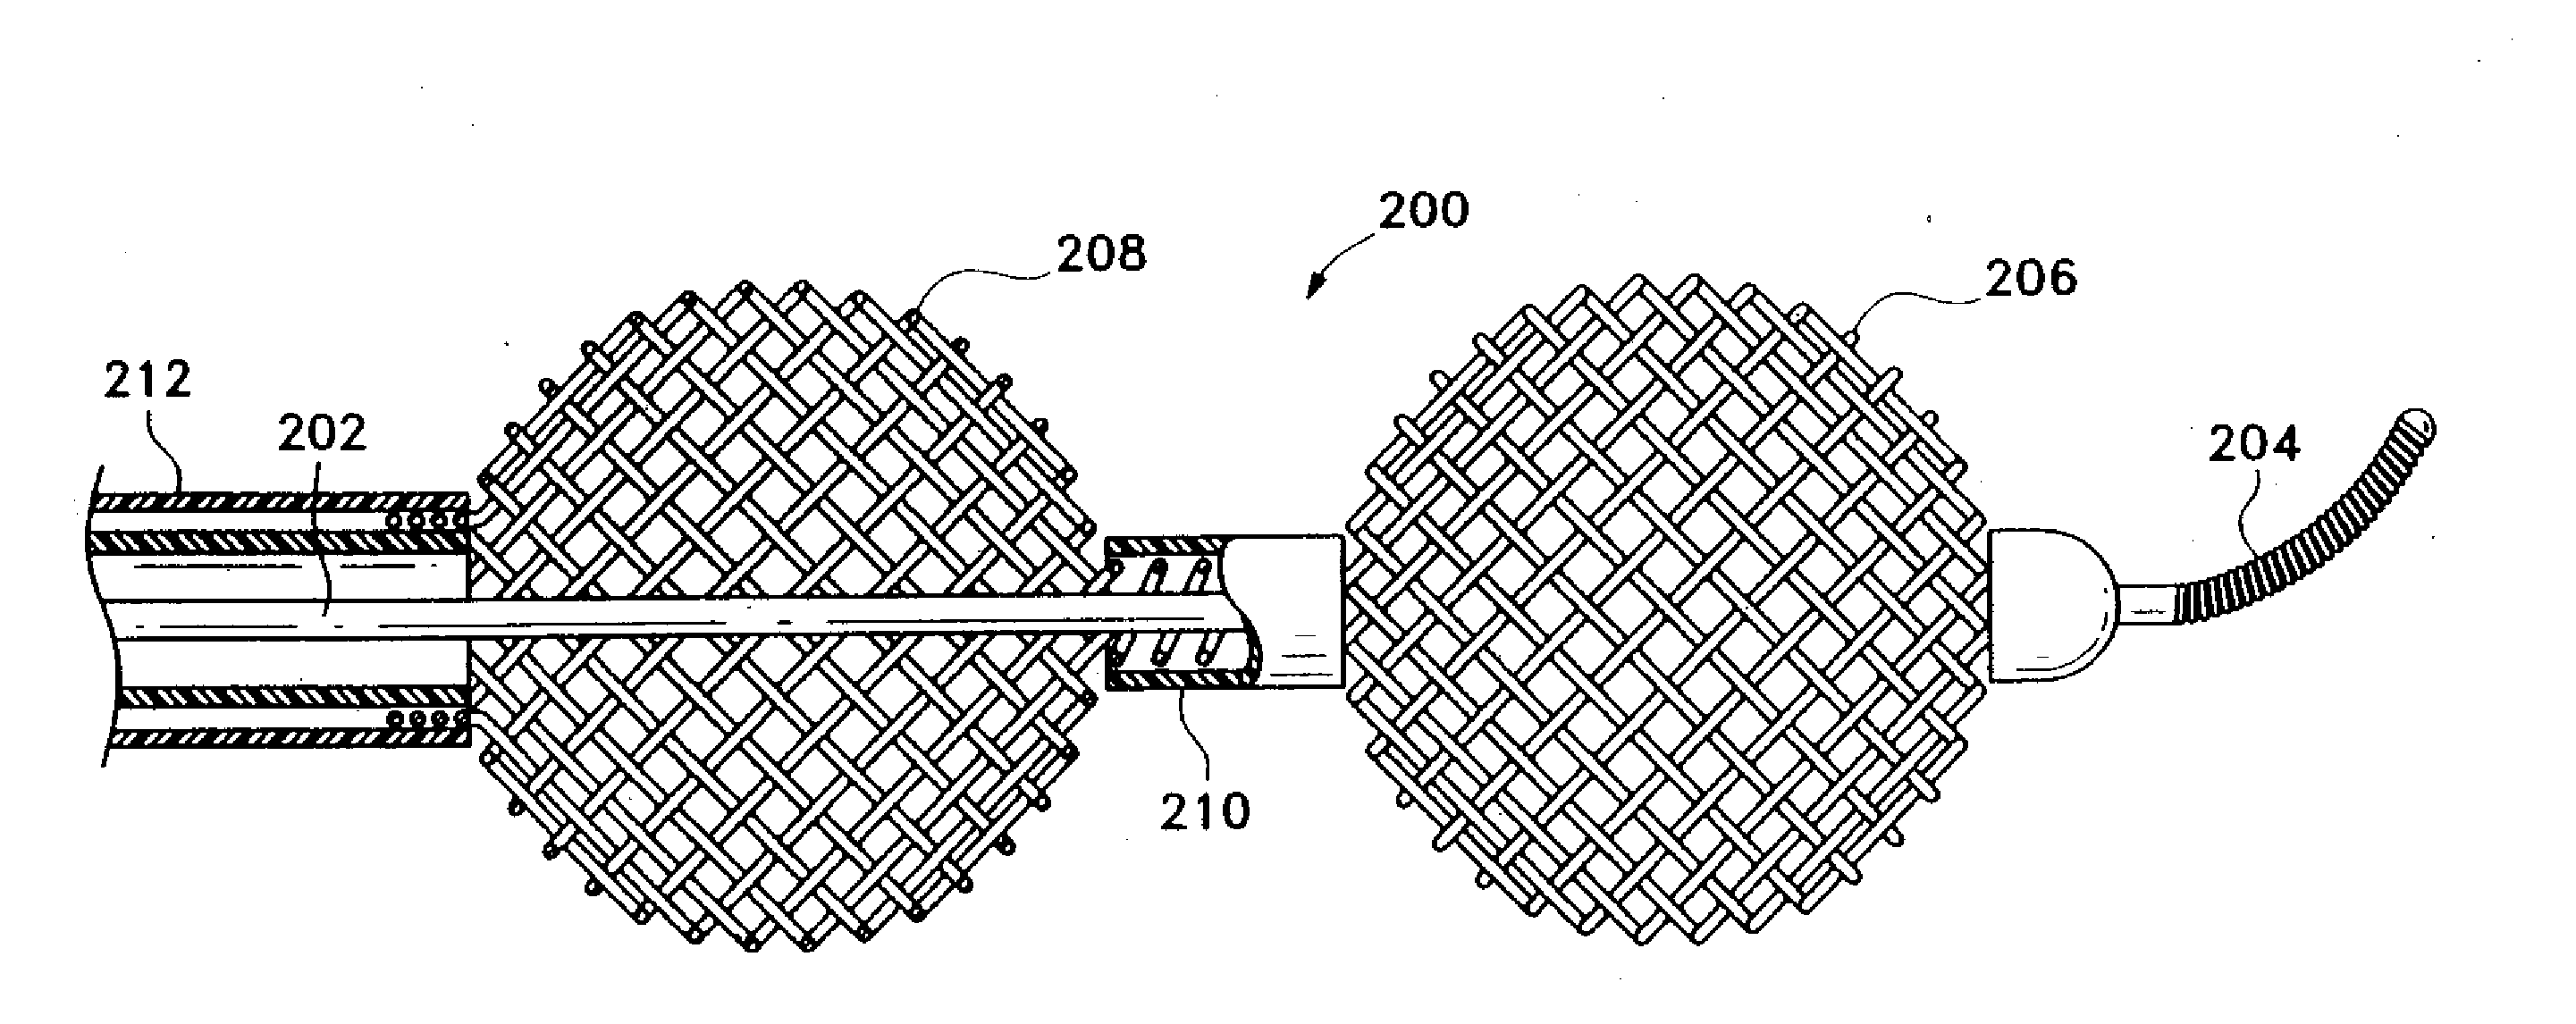 Medical clot treatment device with distal filter